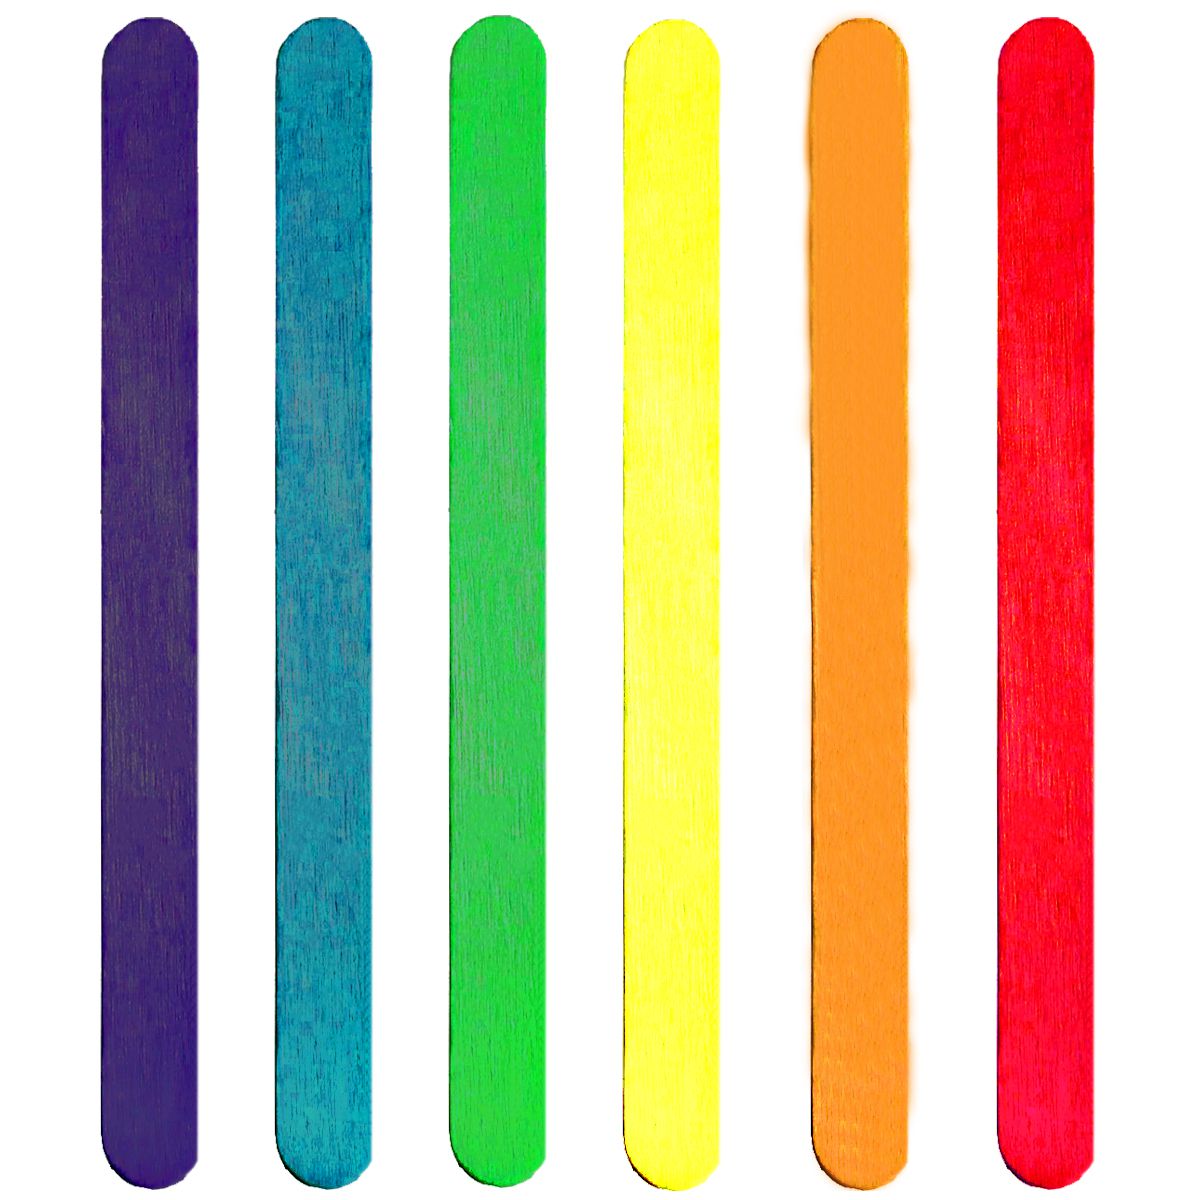 Colored Popsicle Sticks, 200 Pack, 4.5 Inch, Colored Craft Sticks